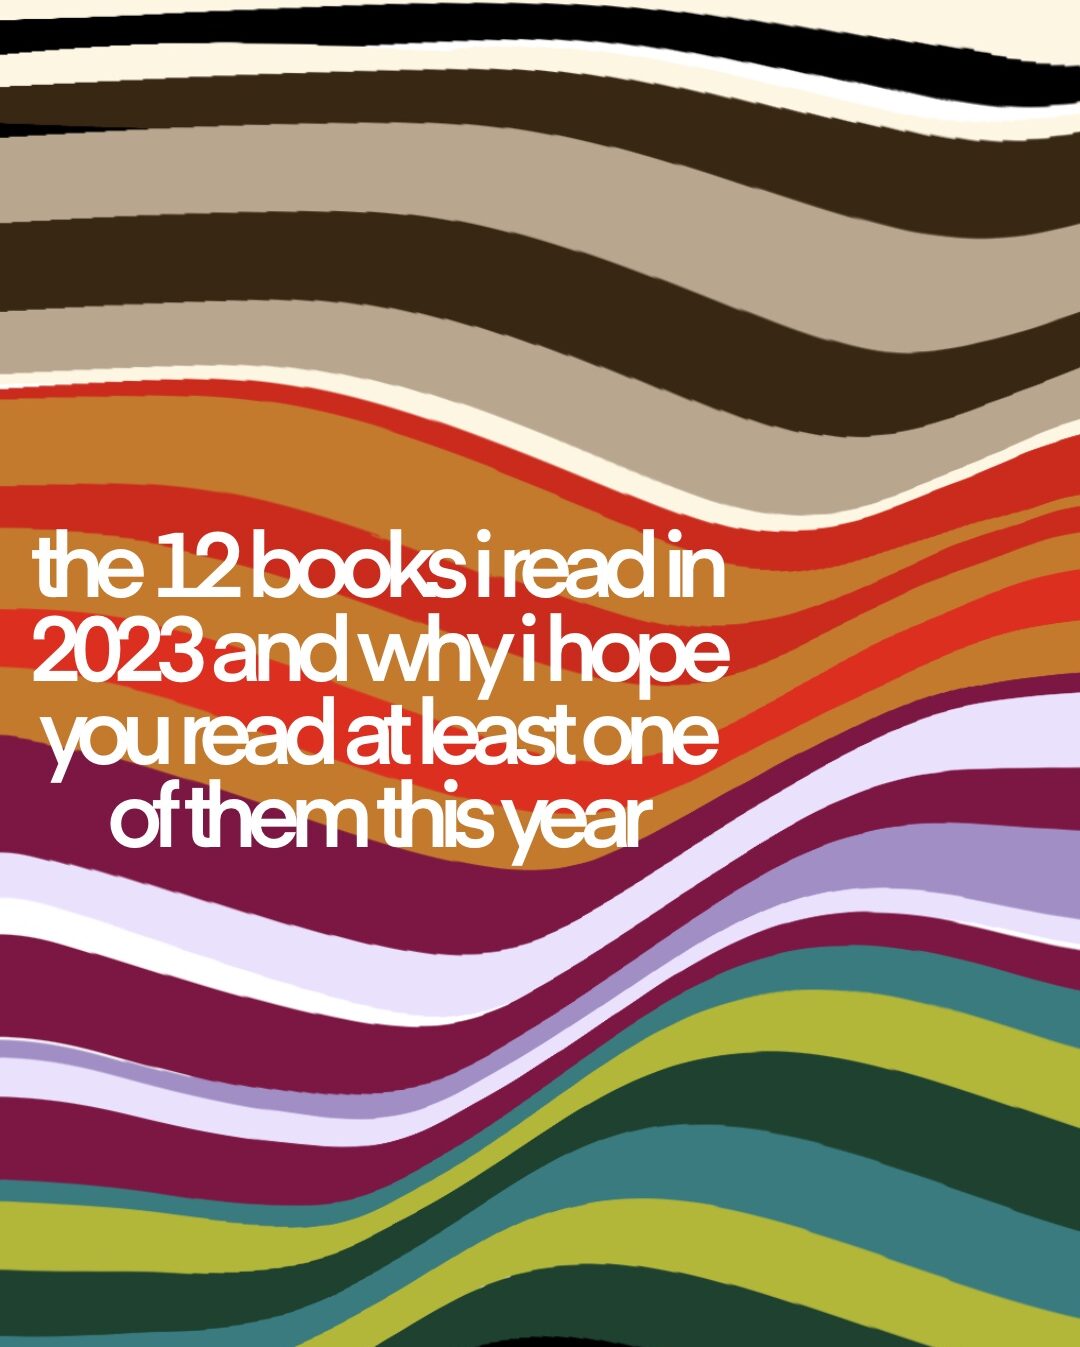 the 12 books i read in 2023 and why i hope you read at least one of them this year